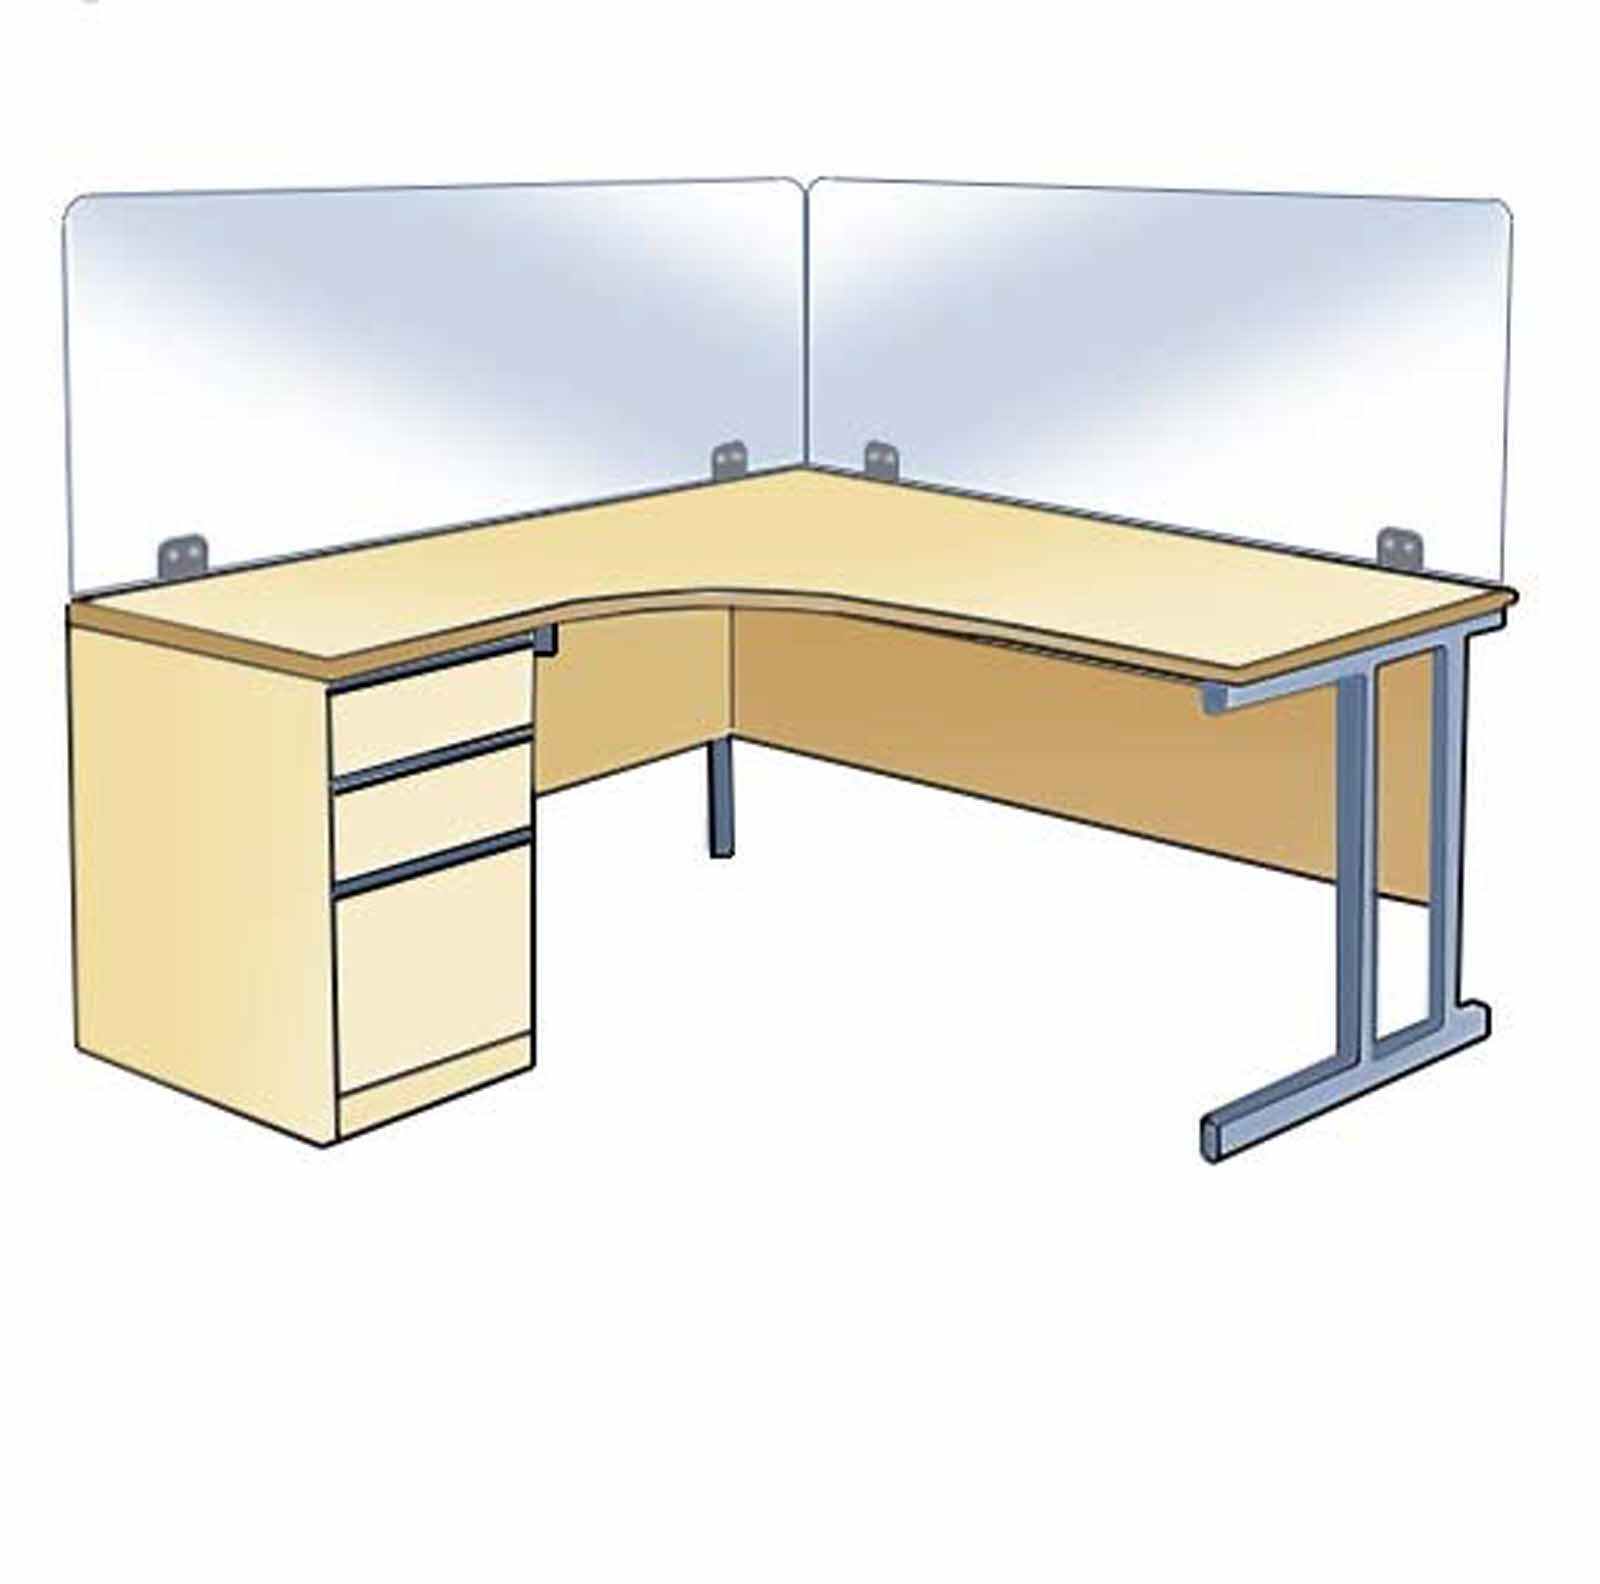 Sold Individually Schools Colleges K143 and Shared Spaces 3 Sizes Large - 45mm K142+ Desk Bracket Clamp for Desk & Table Mounting of Sneeze Guards and Desk Screens in Offices